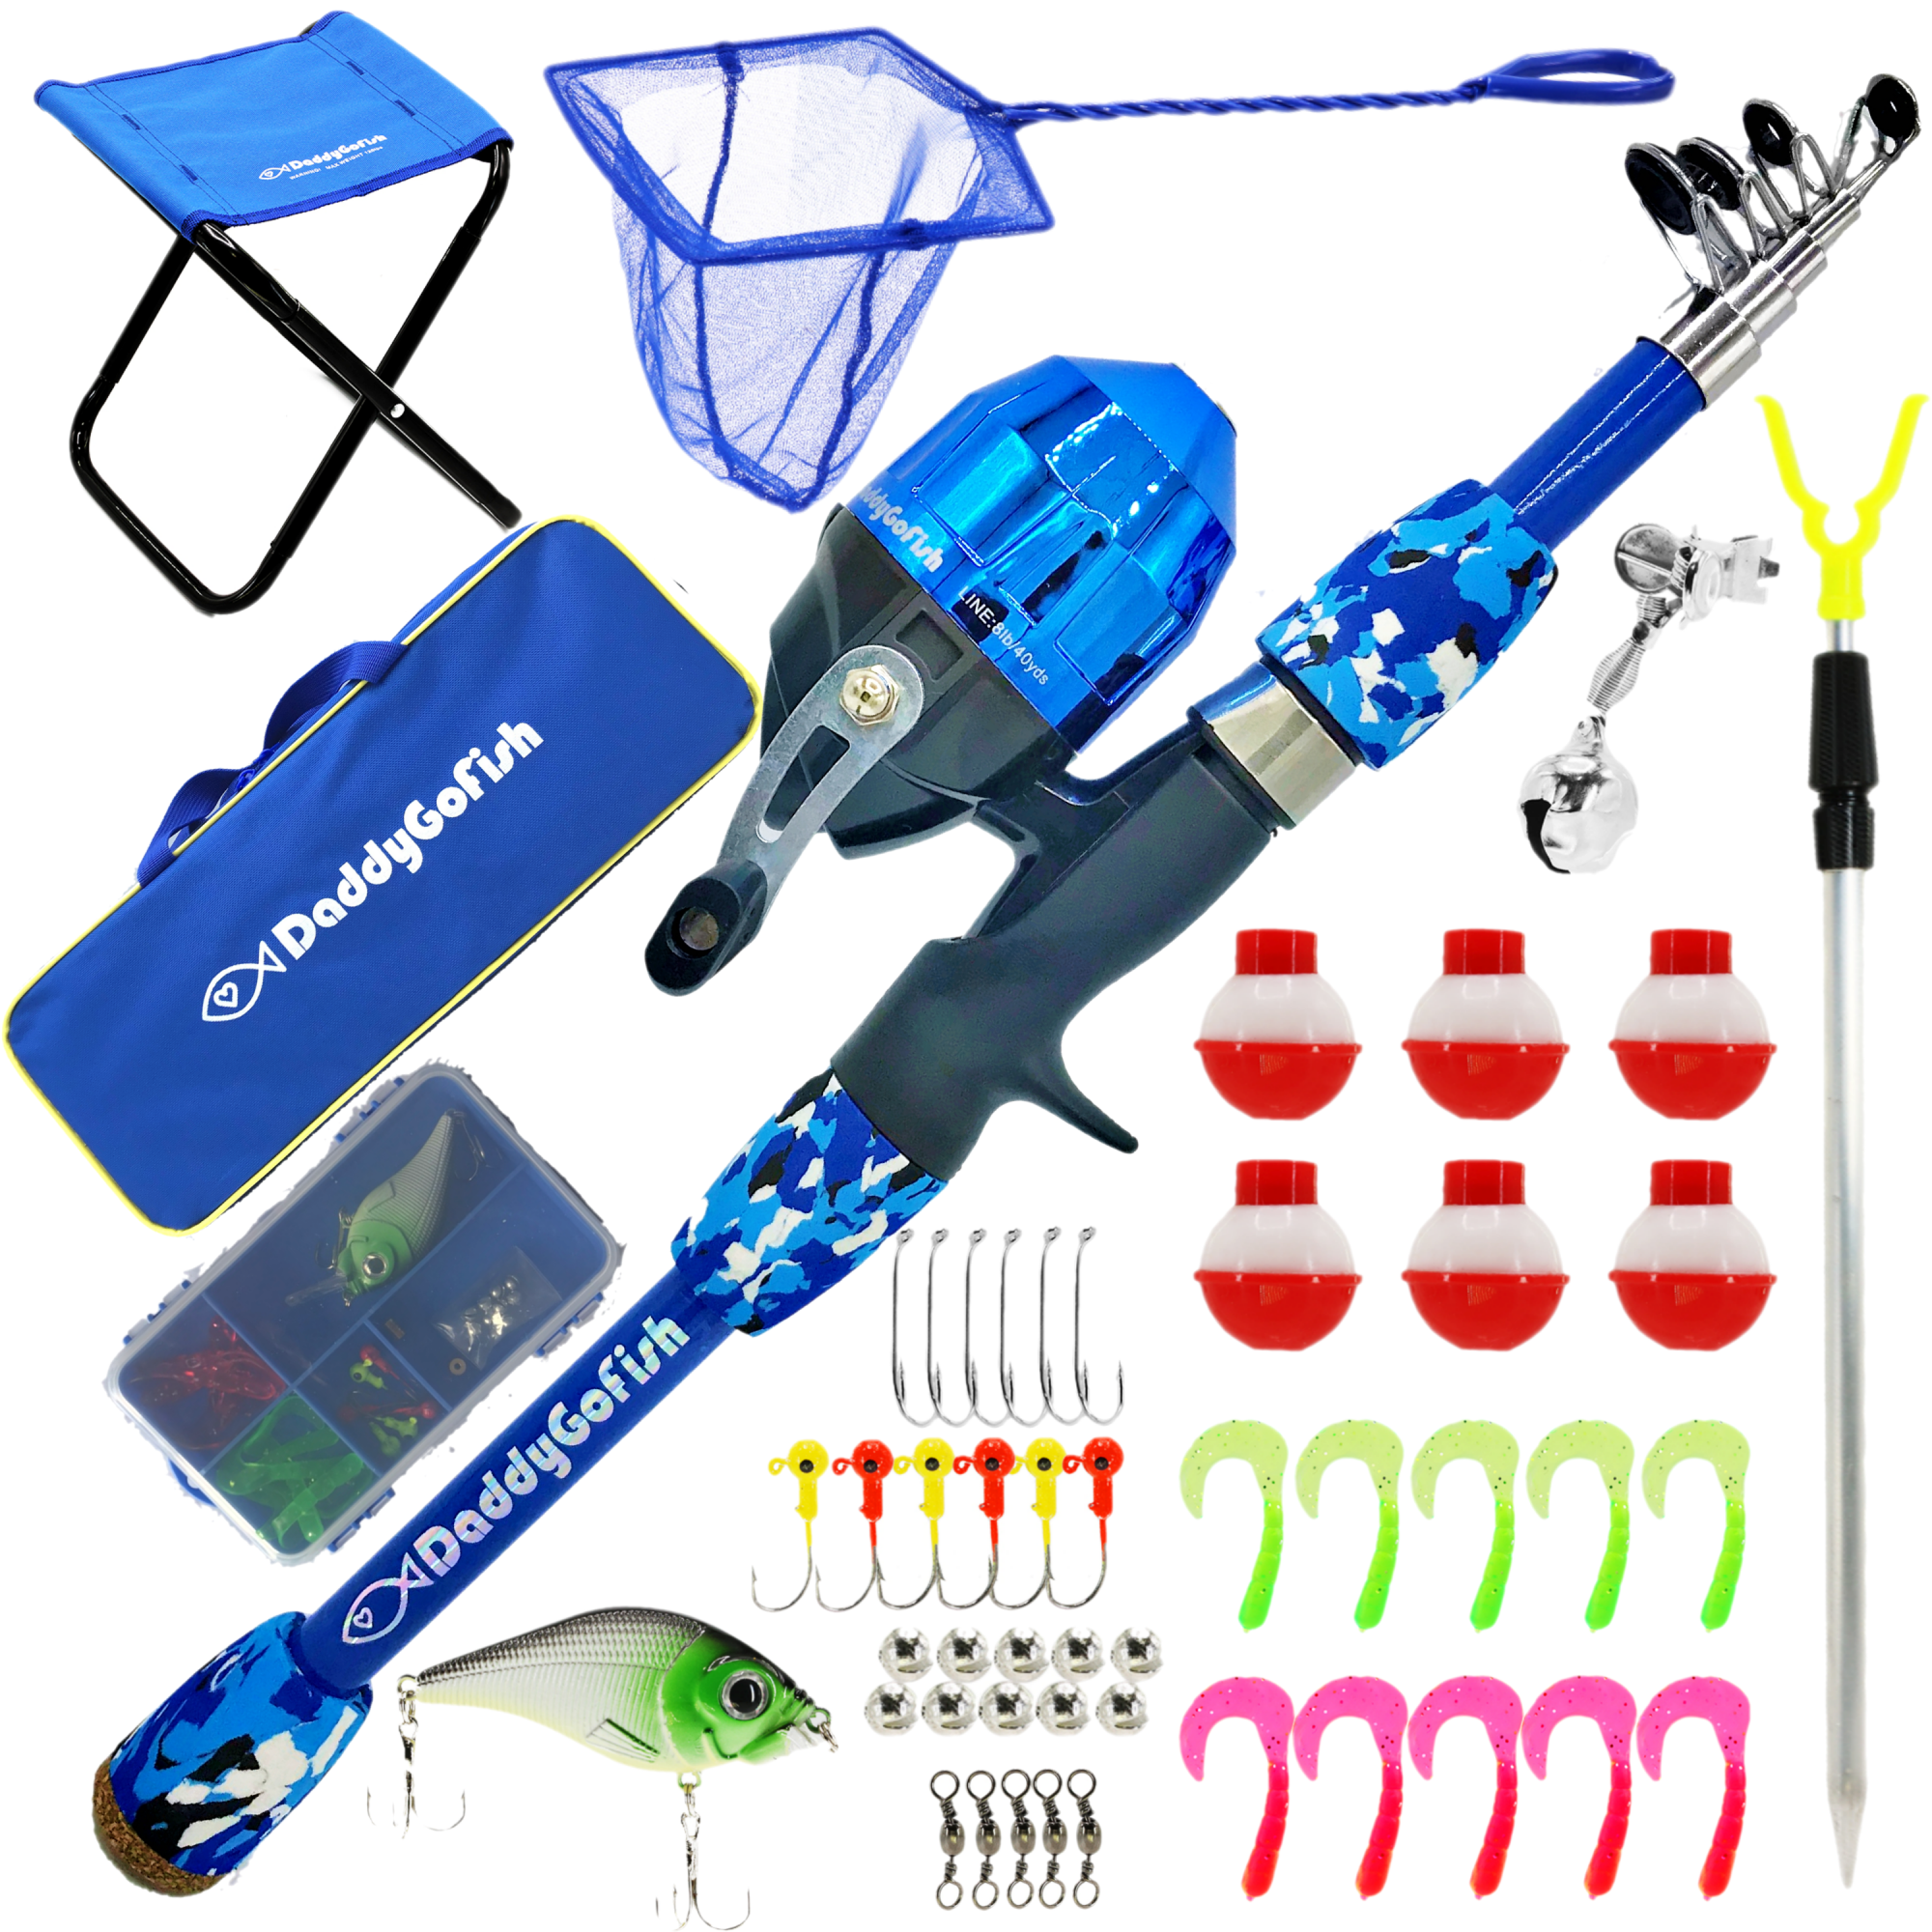 DaddyGoFish Kids Fishing Pole – Telescopic Rod & Reel Combo with Collapsible Chair Tackle Box Bait Net and Carry Bag for Boys and Girls Blue, 4ft Rod Holder 